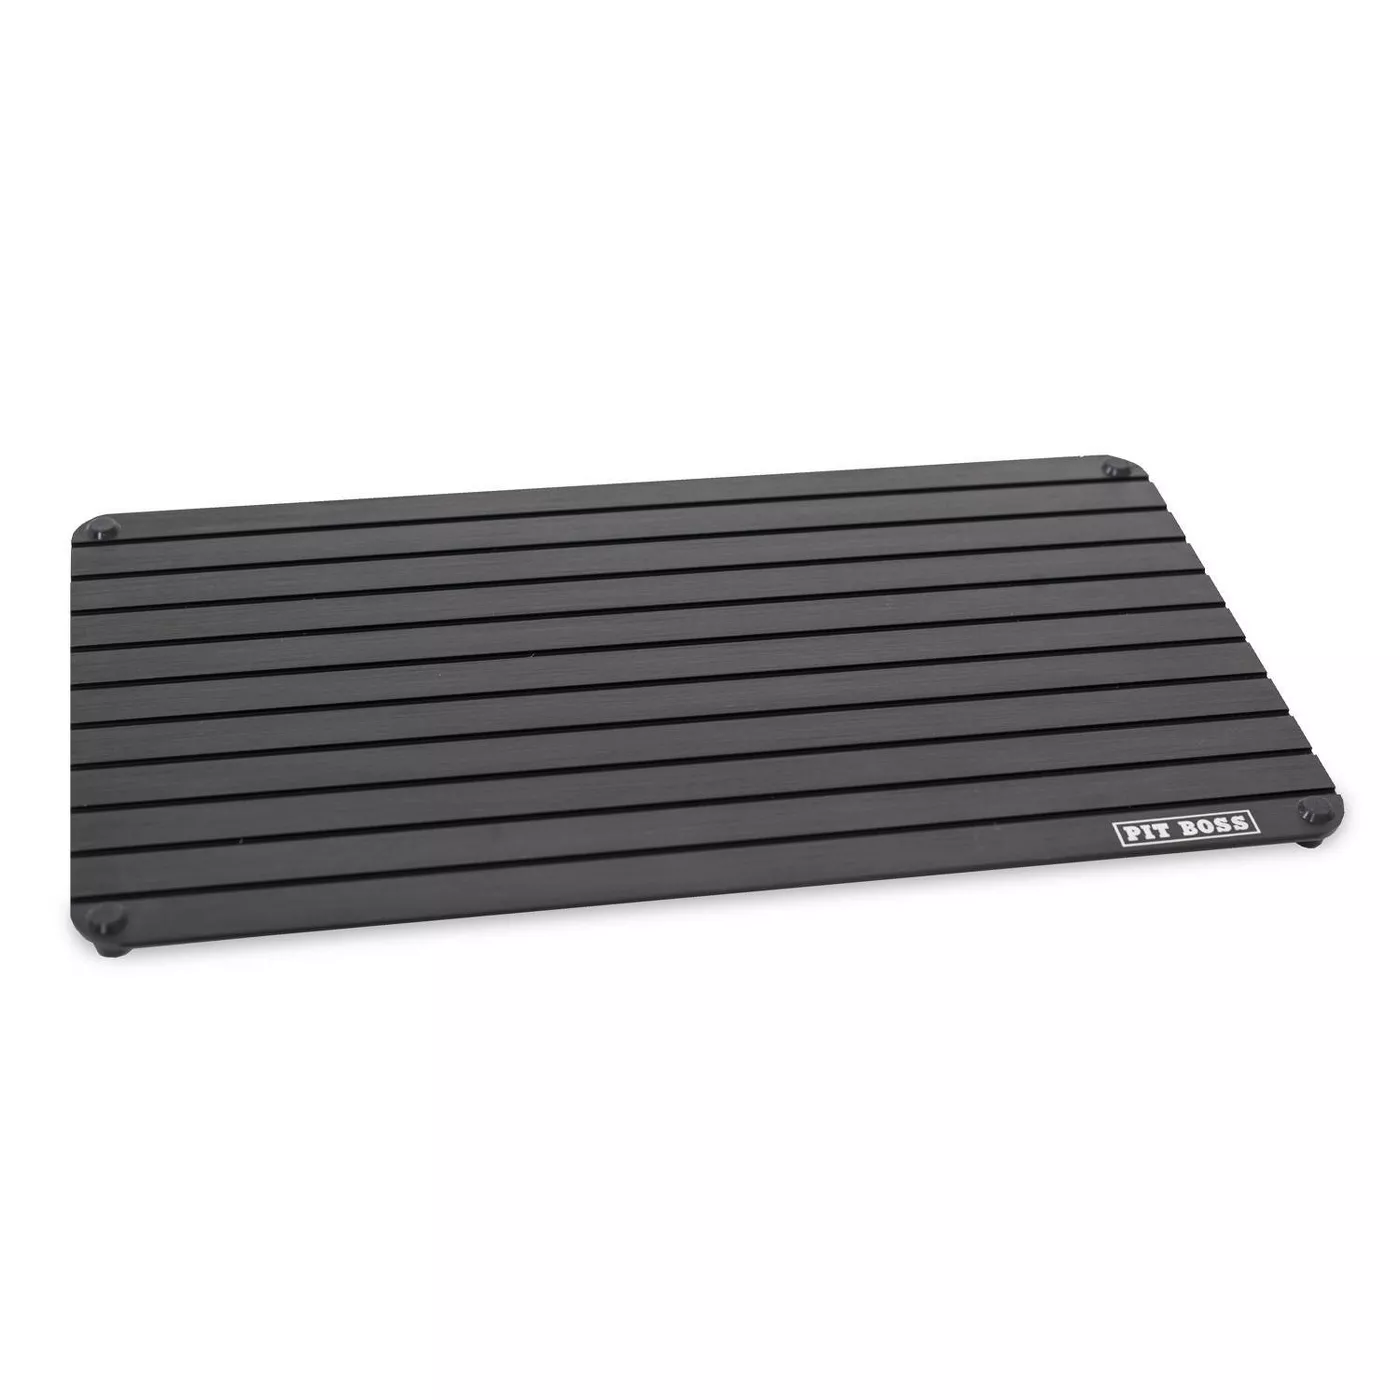 Defrosting Tray Black - Pit Boss - image 1 of 3